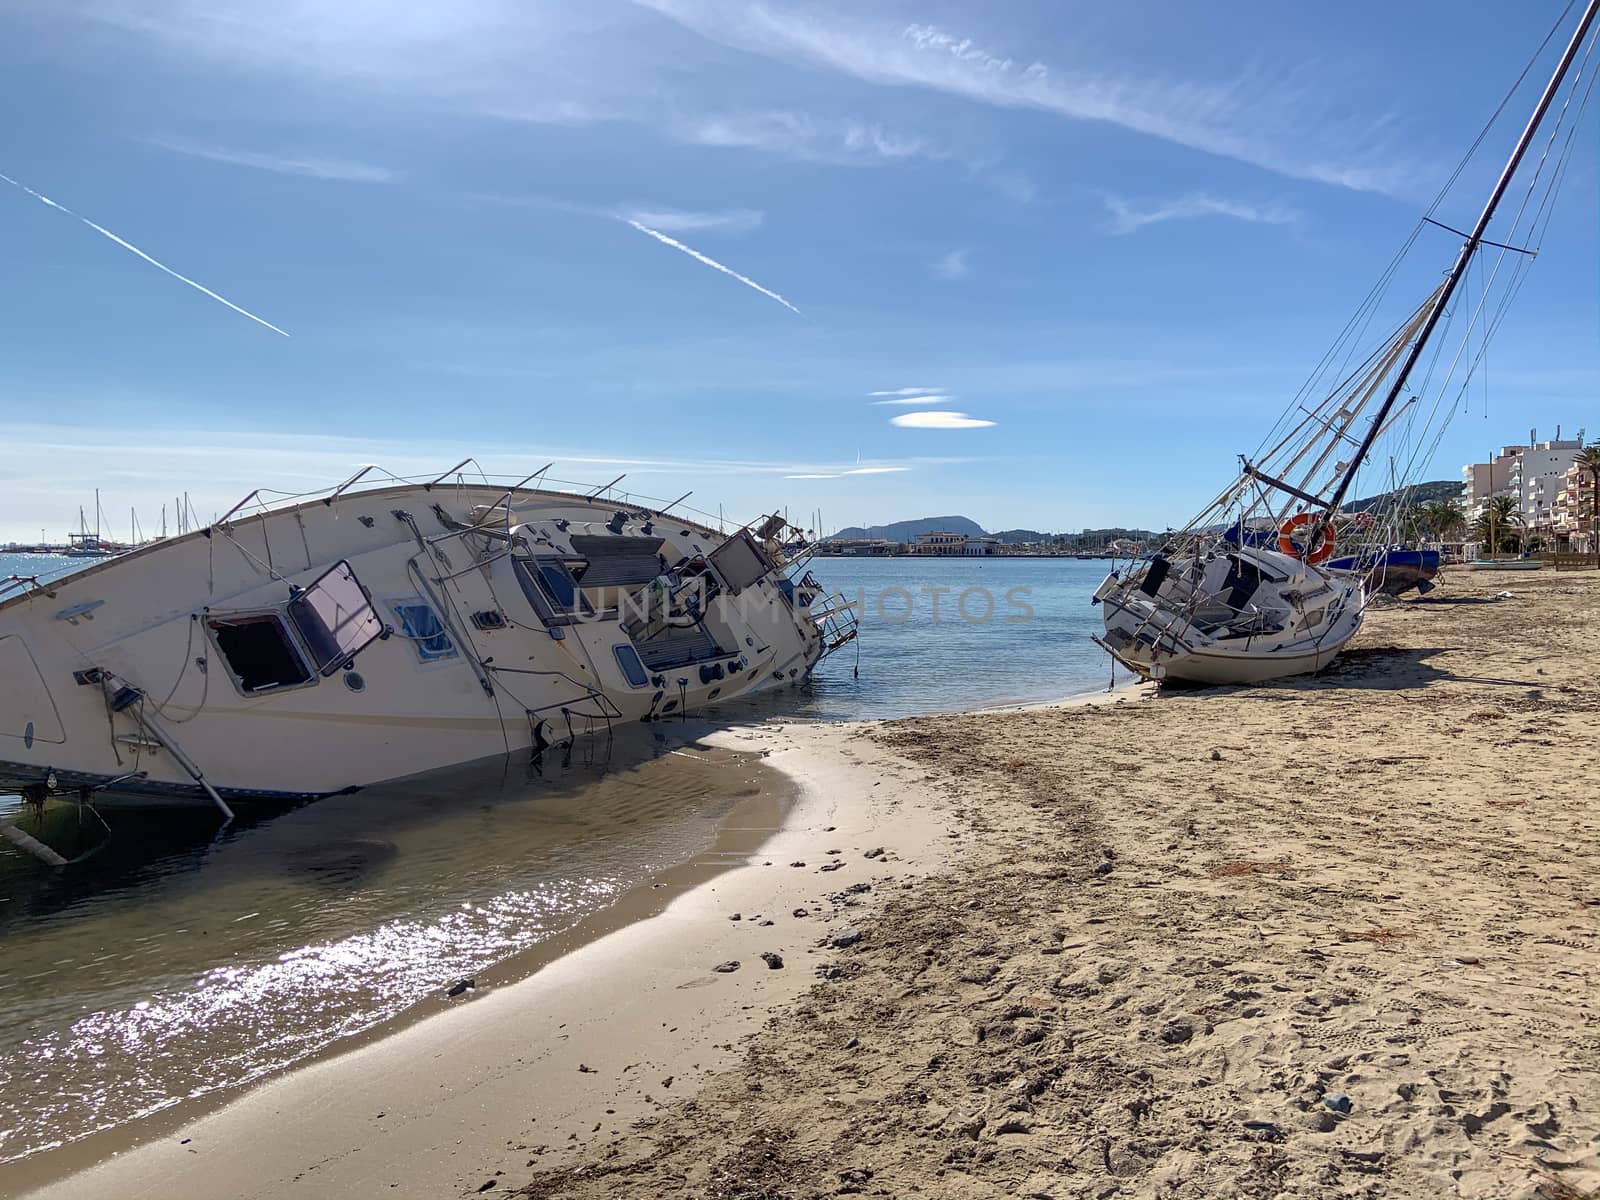 Several boats stranded on the beach after a storm. On a sunny day with few clouds.